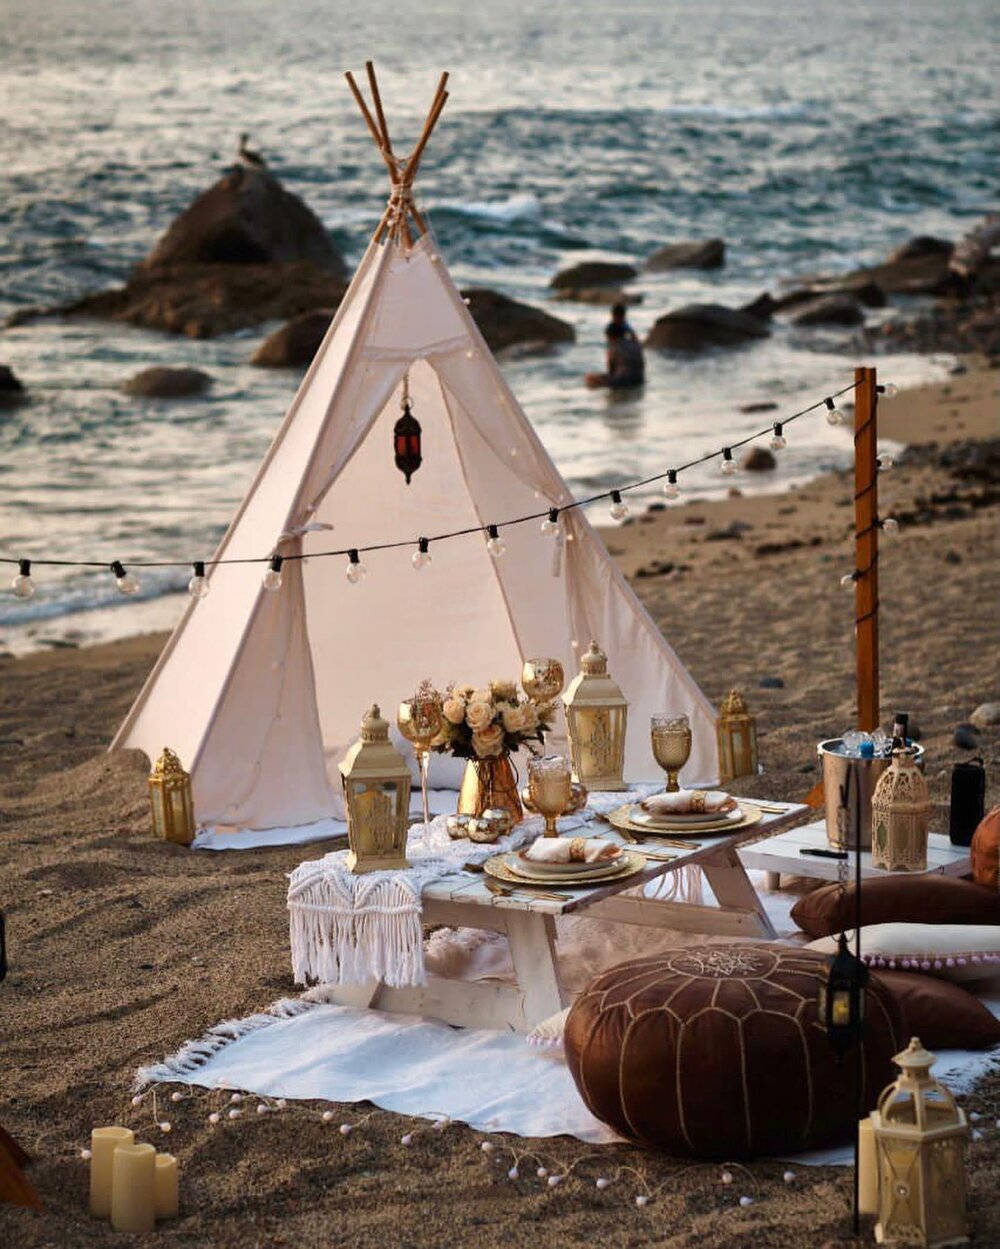 Aesthetic Beach Tent Picture